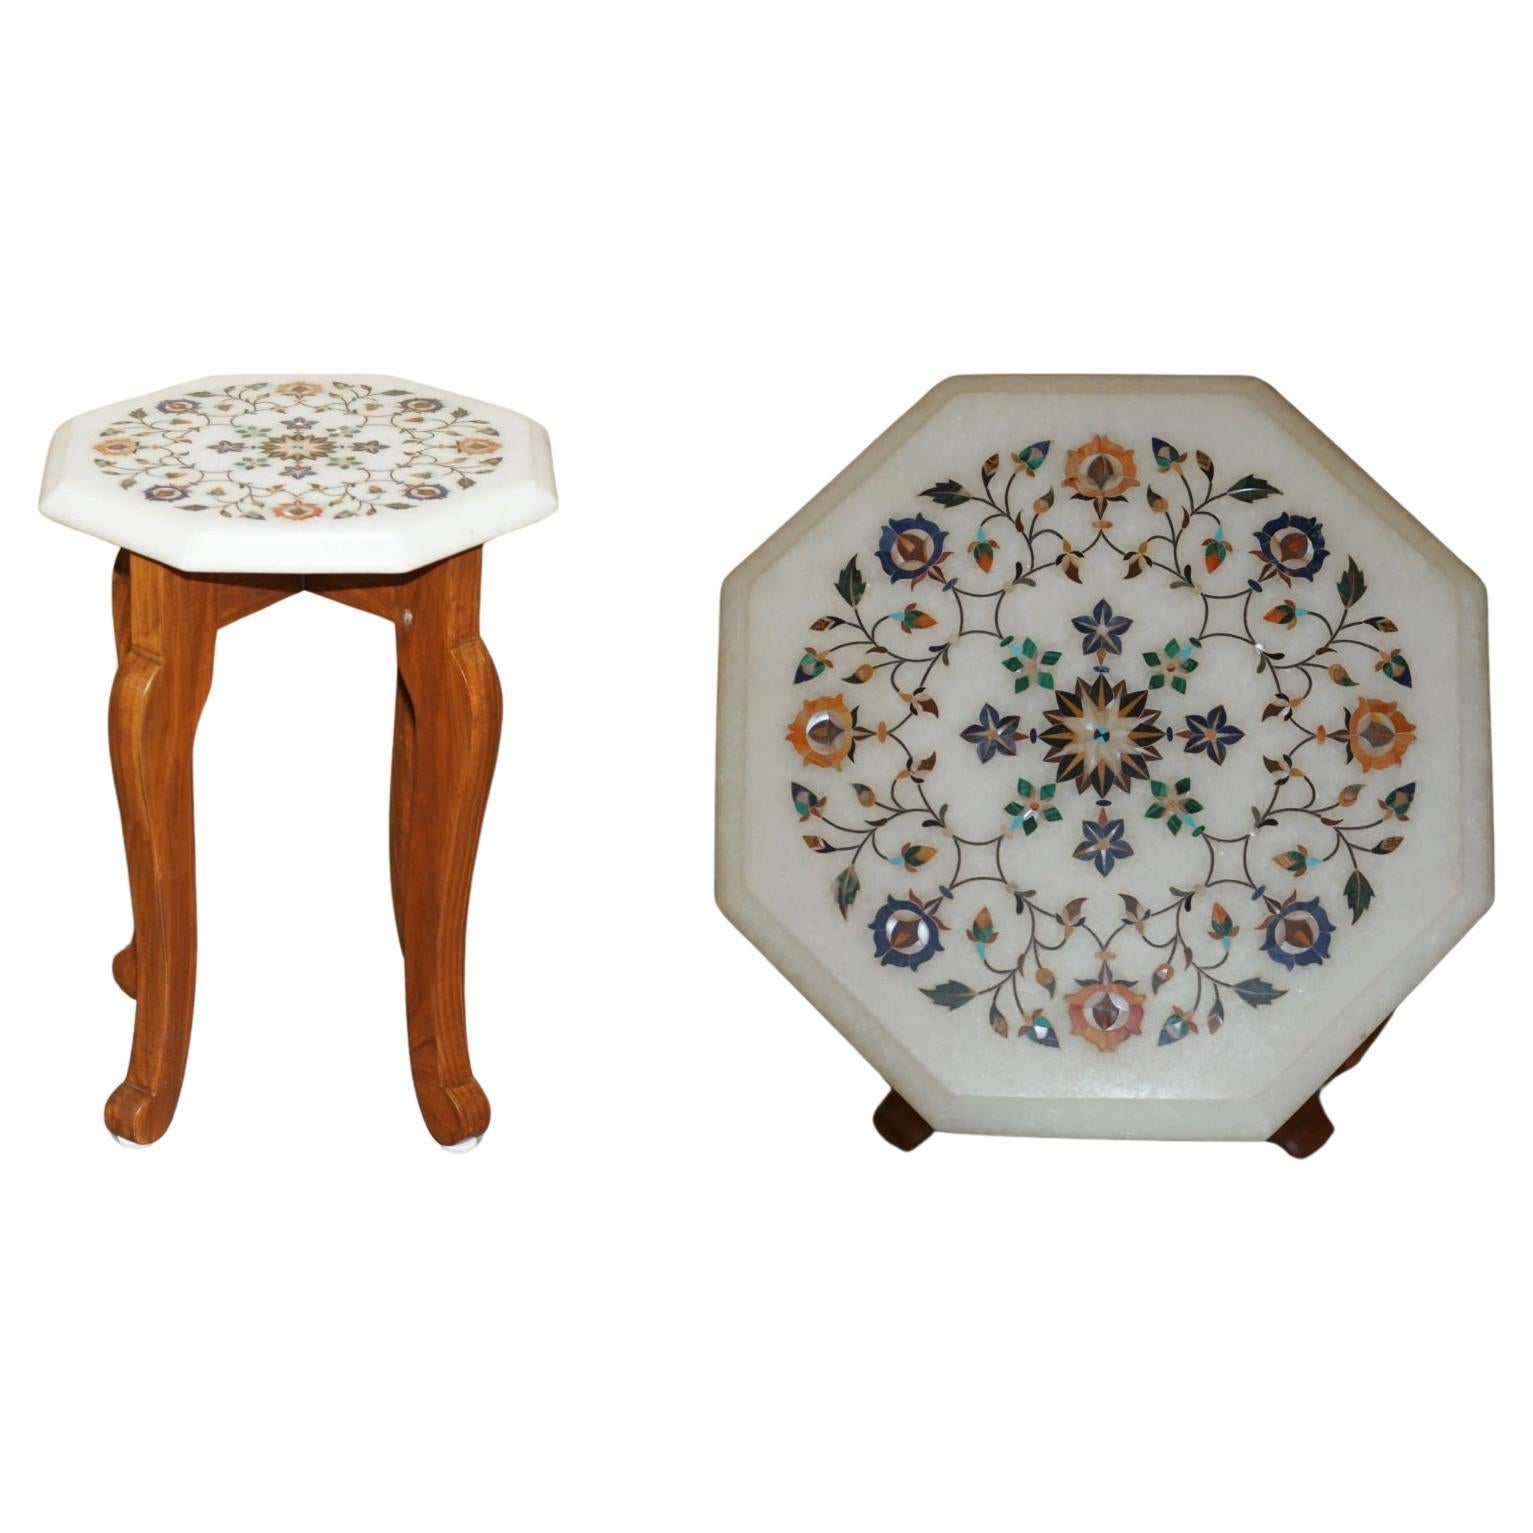 STUNNING MiD CENTURY INDIAN MARBLE PIETRA DURA INLAY SIDE TABLE WITH RECEIPT For Sale